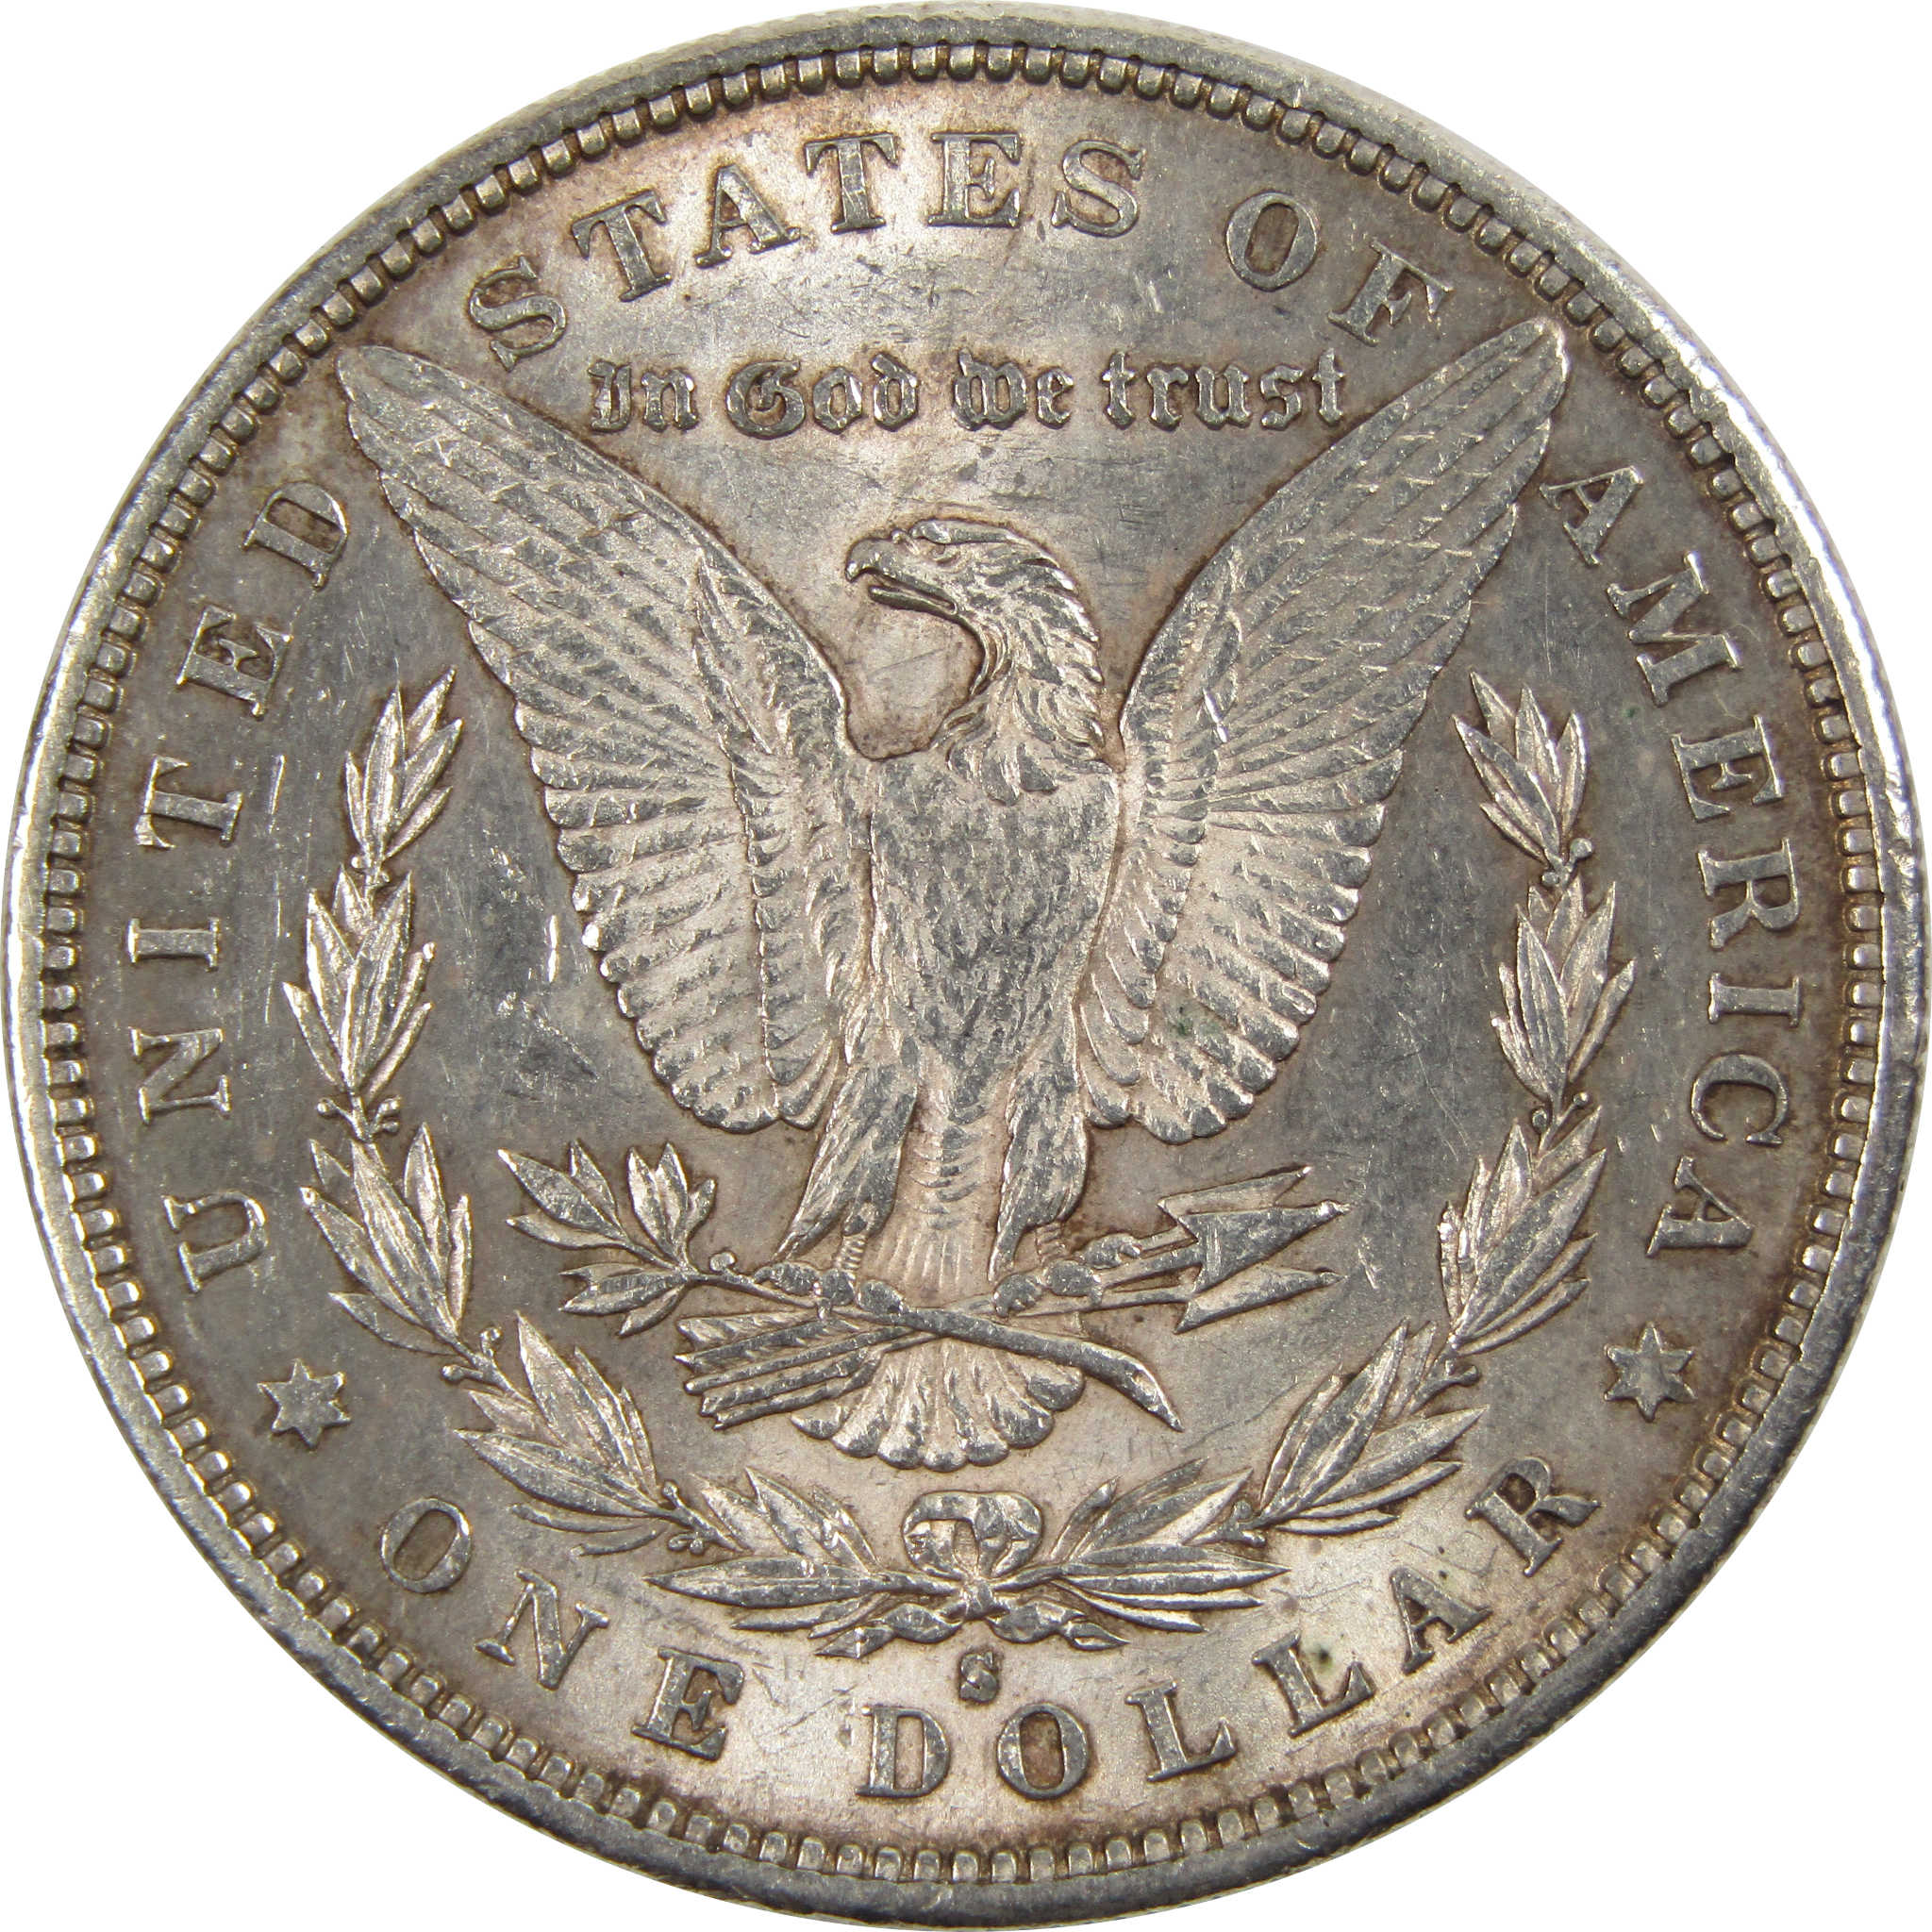 1887 S Morgan Dollar AU About Uncirculated 90% Silver SKU:I8193 - Morgan coin - Morgan silver dollar - Morgan silver dollar for sale - Profile Coins &amp; Collectibles